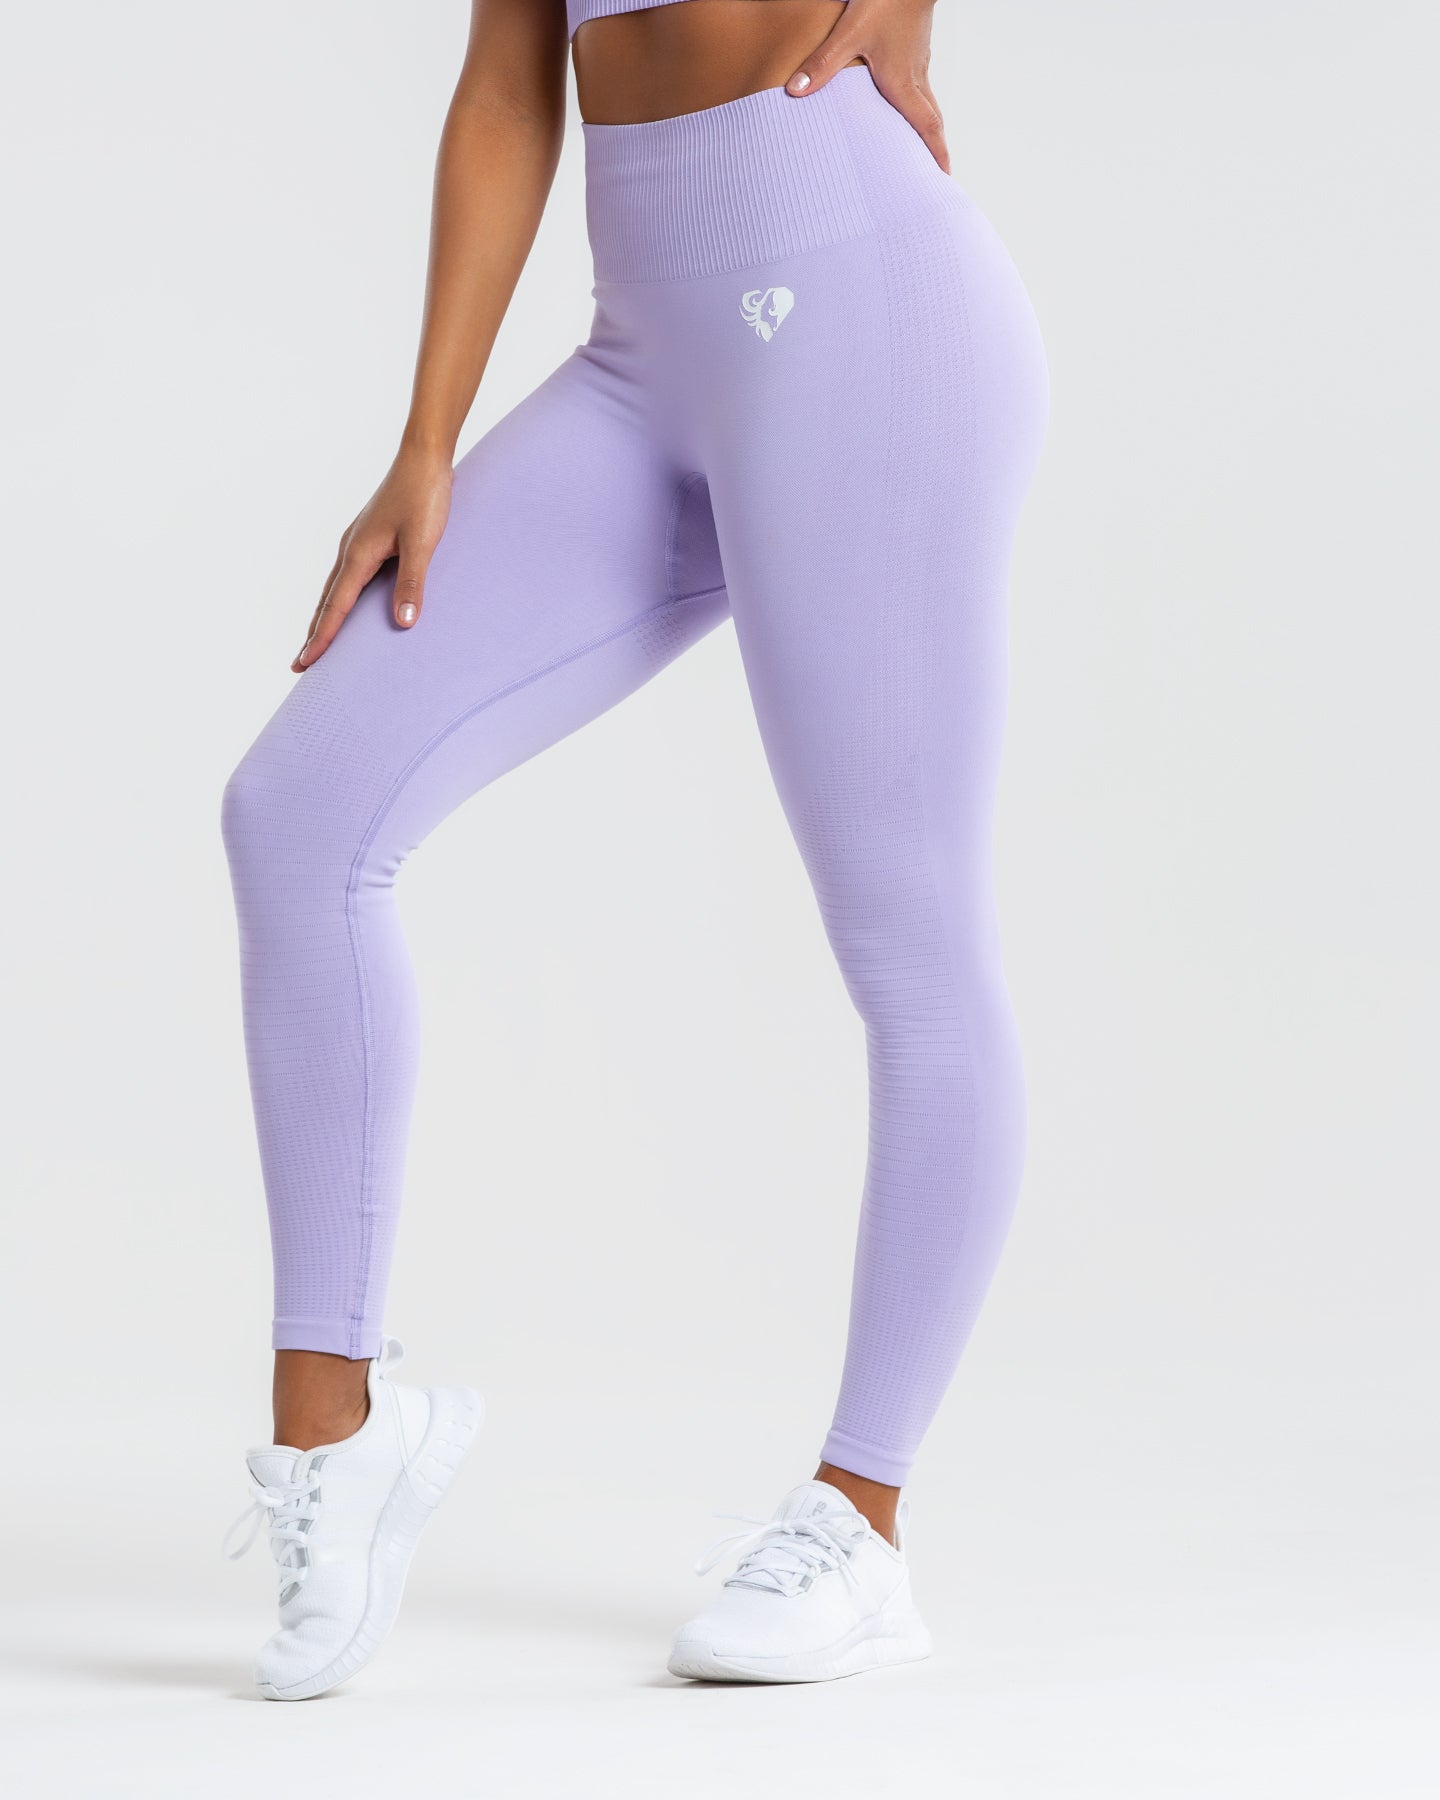 11 Best Workout Leggings 2023, According to Personal Trainers | Glamour